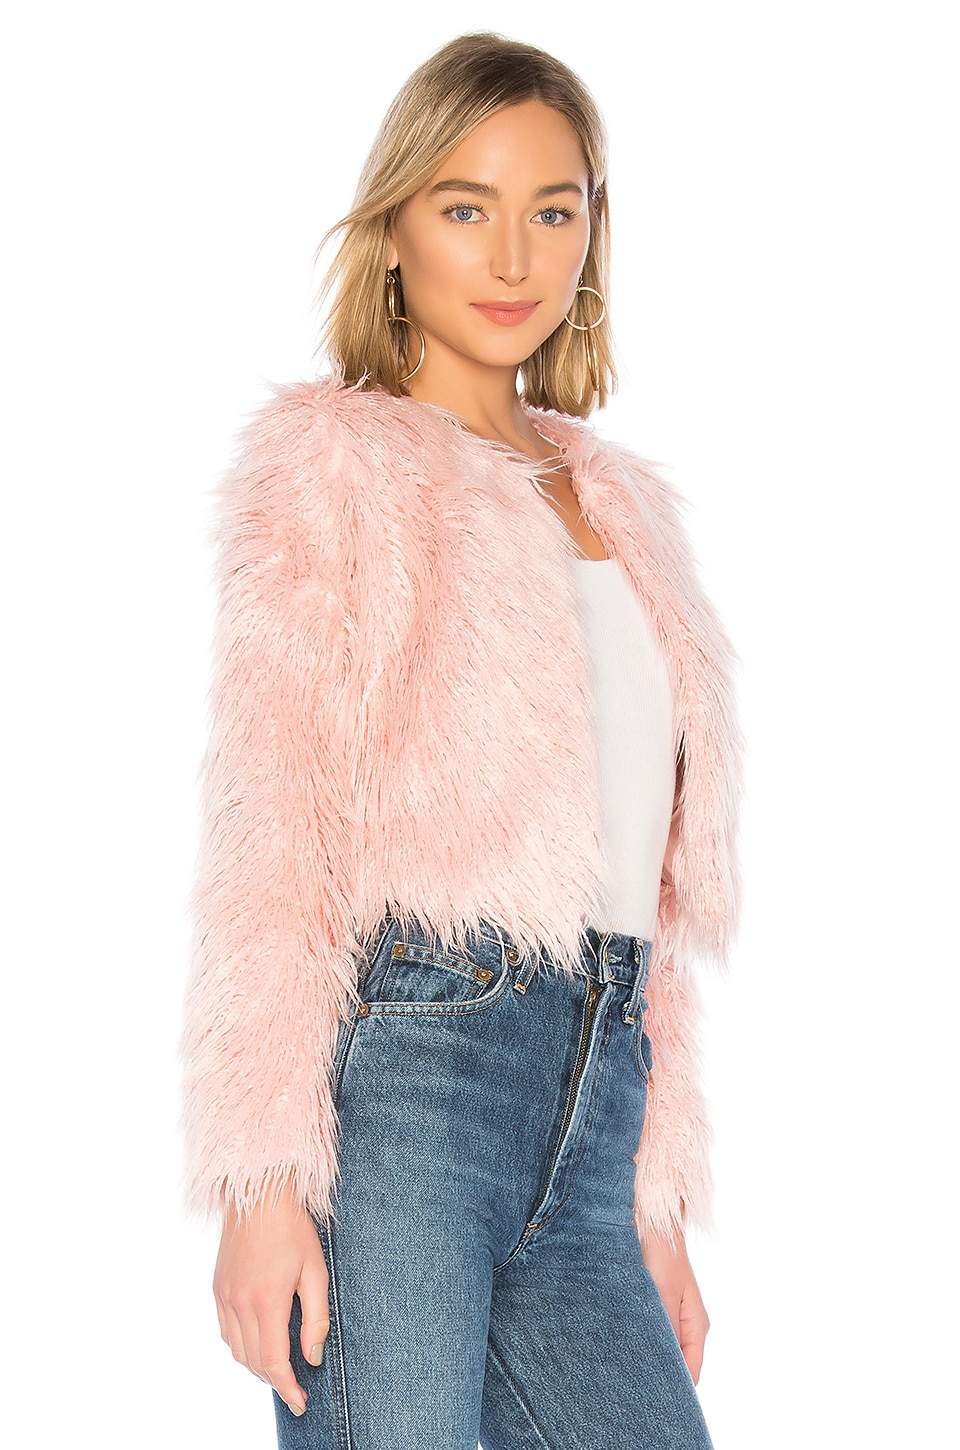 MAJORELLE Heather Coat in Candy Pink | REVOLVE